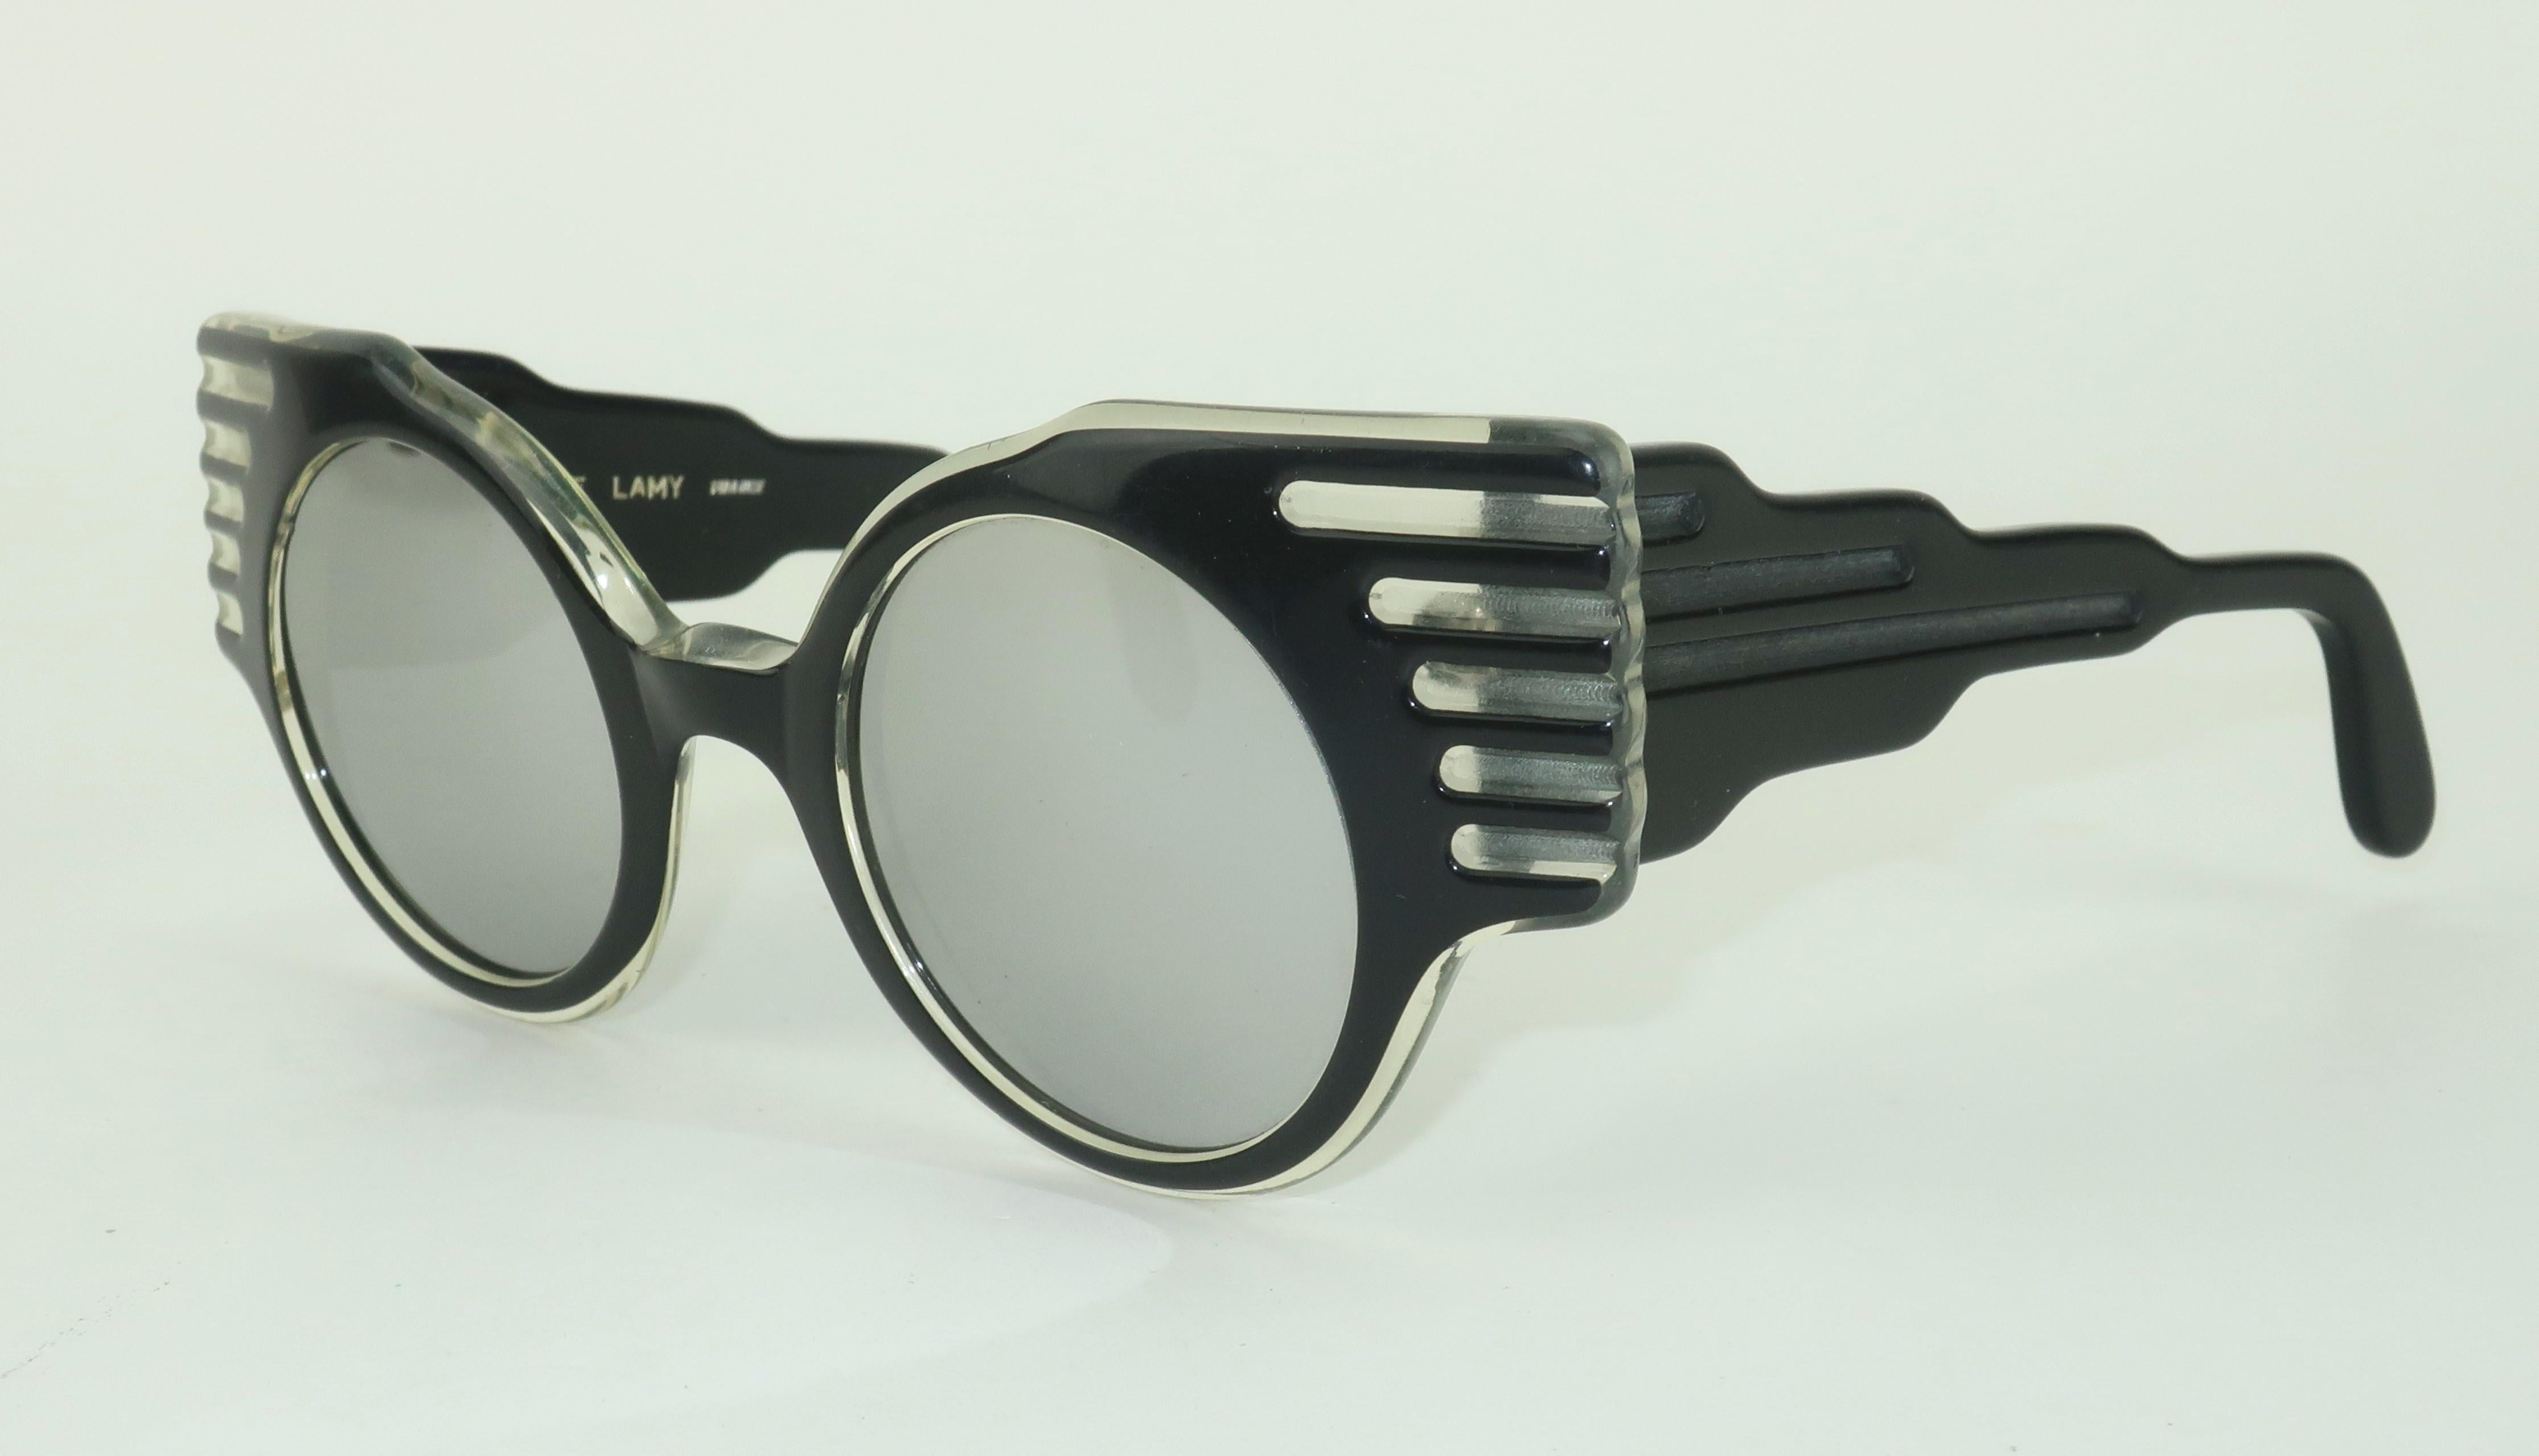 From the 'High Priestess of Paris' via 1980's Los Angeles, a fabulous pair of black sunglasses by designer, Michele Lamy.    These frames boast a unique silhouette with an angular style earning the moniker 'Cadillac Tailfin' sunglasses.  They have